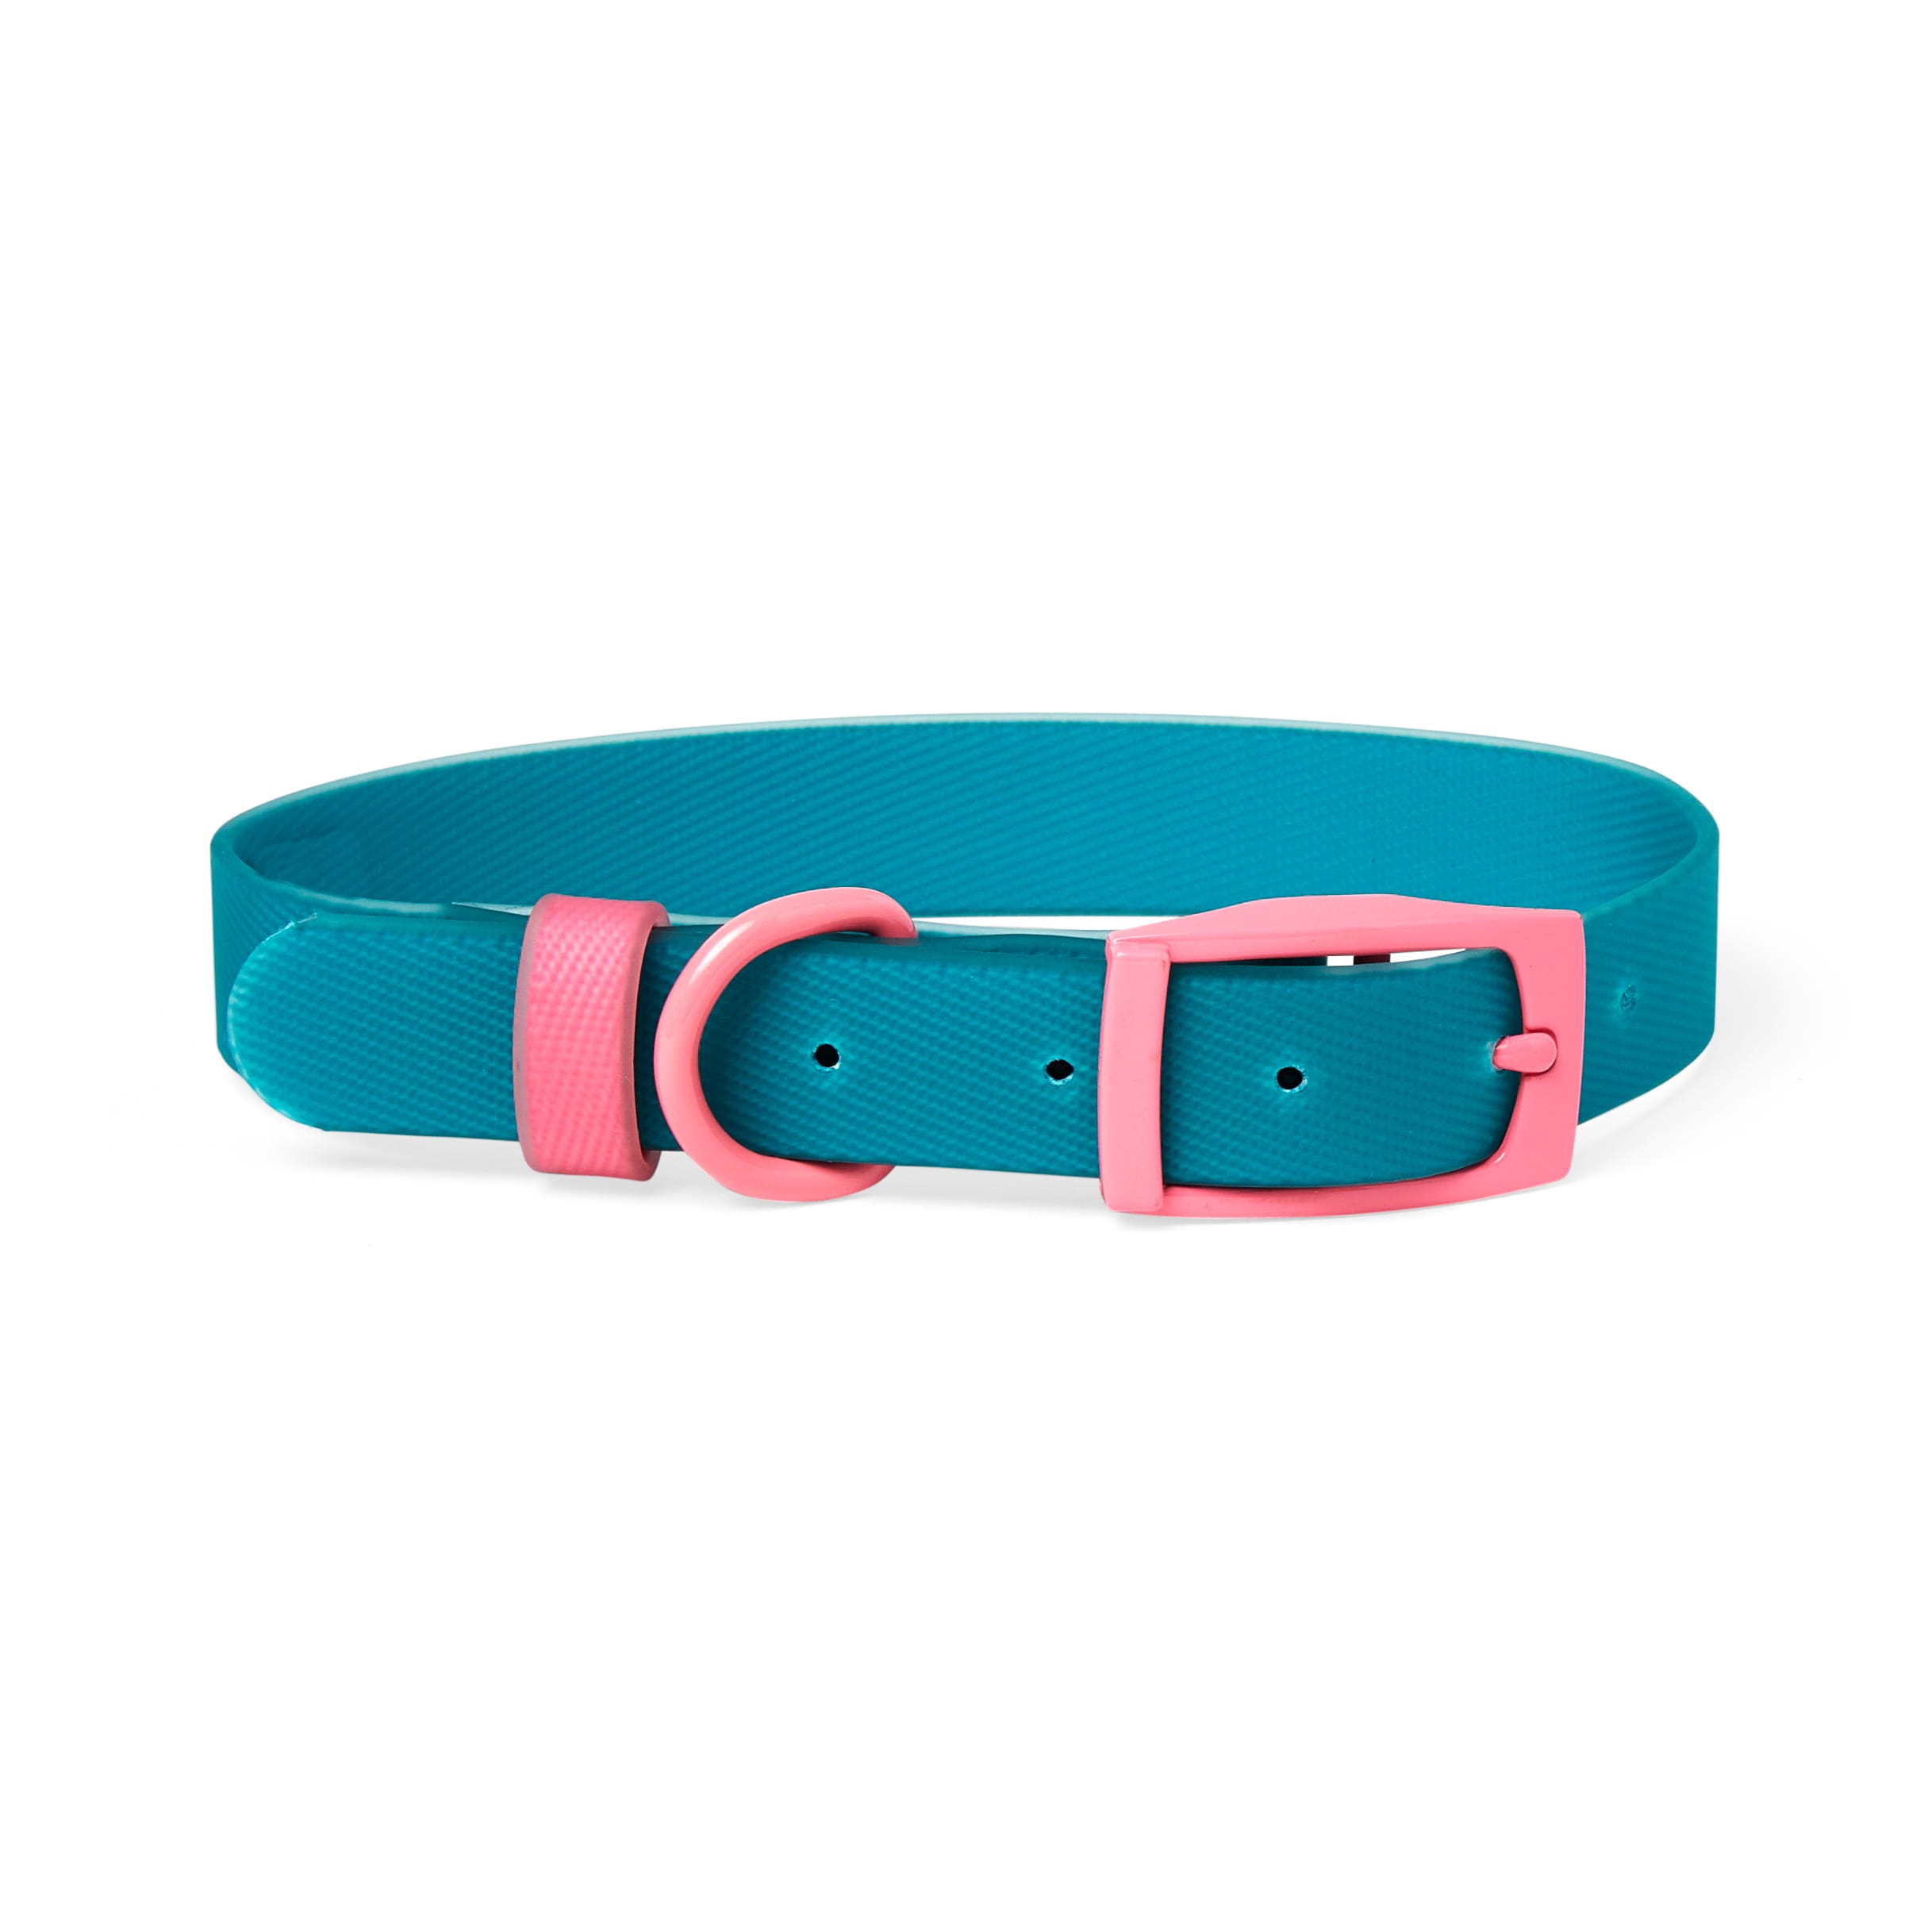 YOULY The Extrovert Water-Resistant Teal & Pink Colorblocked Dog Collar ...